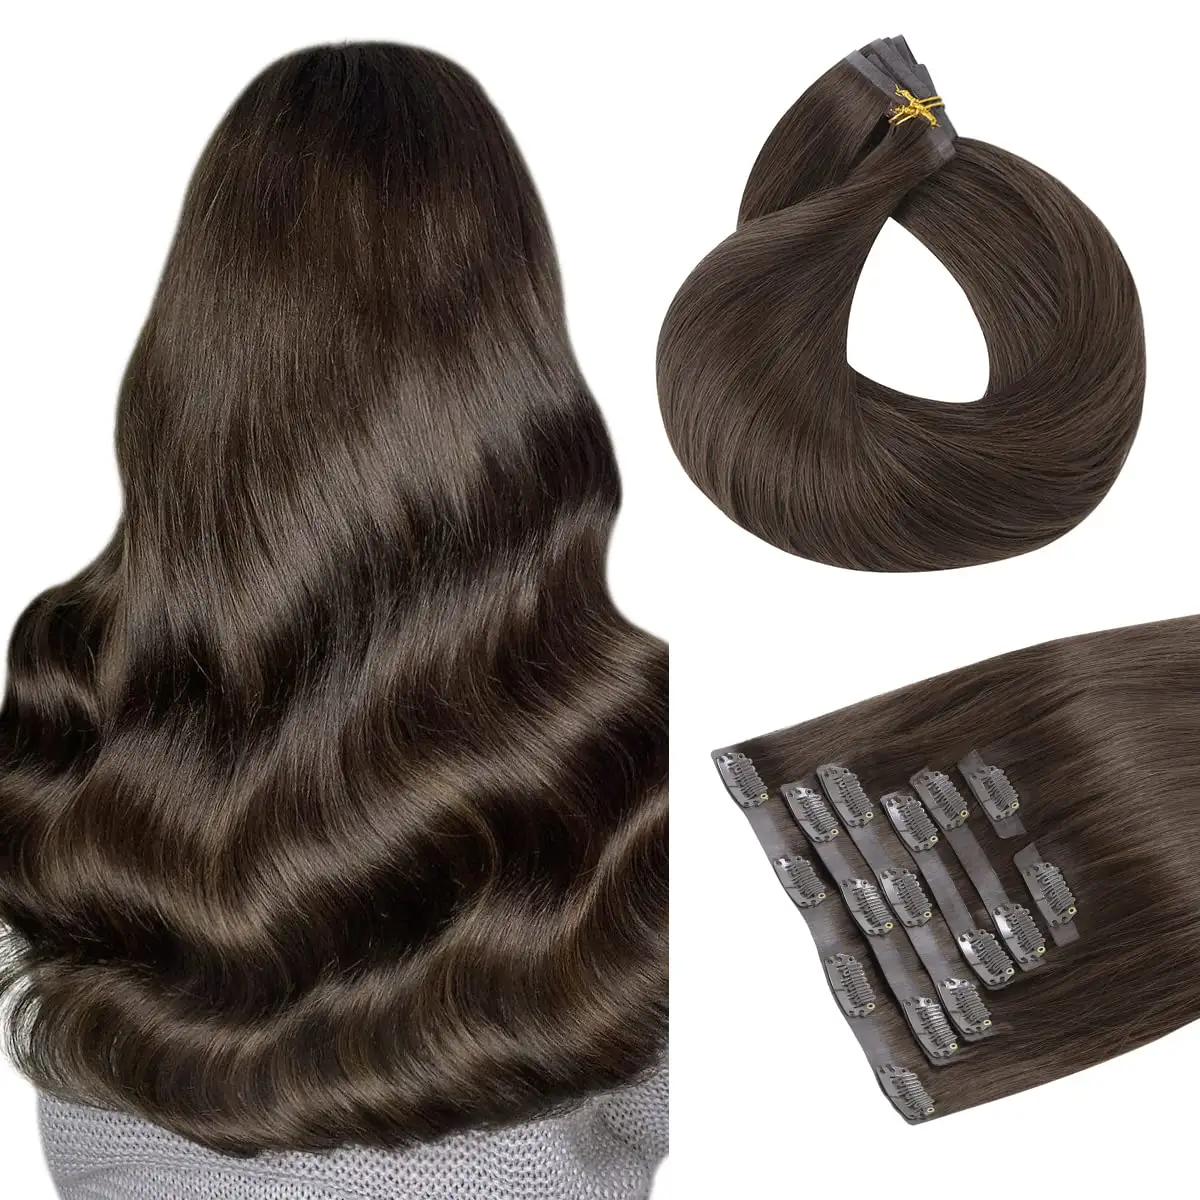 Seamless Clip In Raw Hair Extensions Burmese Invisible 7pcs Double Weft Human Hair Extensions Clip Ins Russian100human Hair